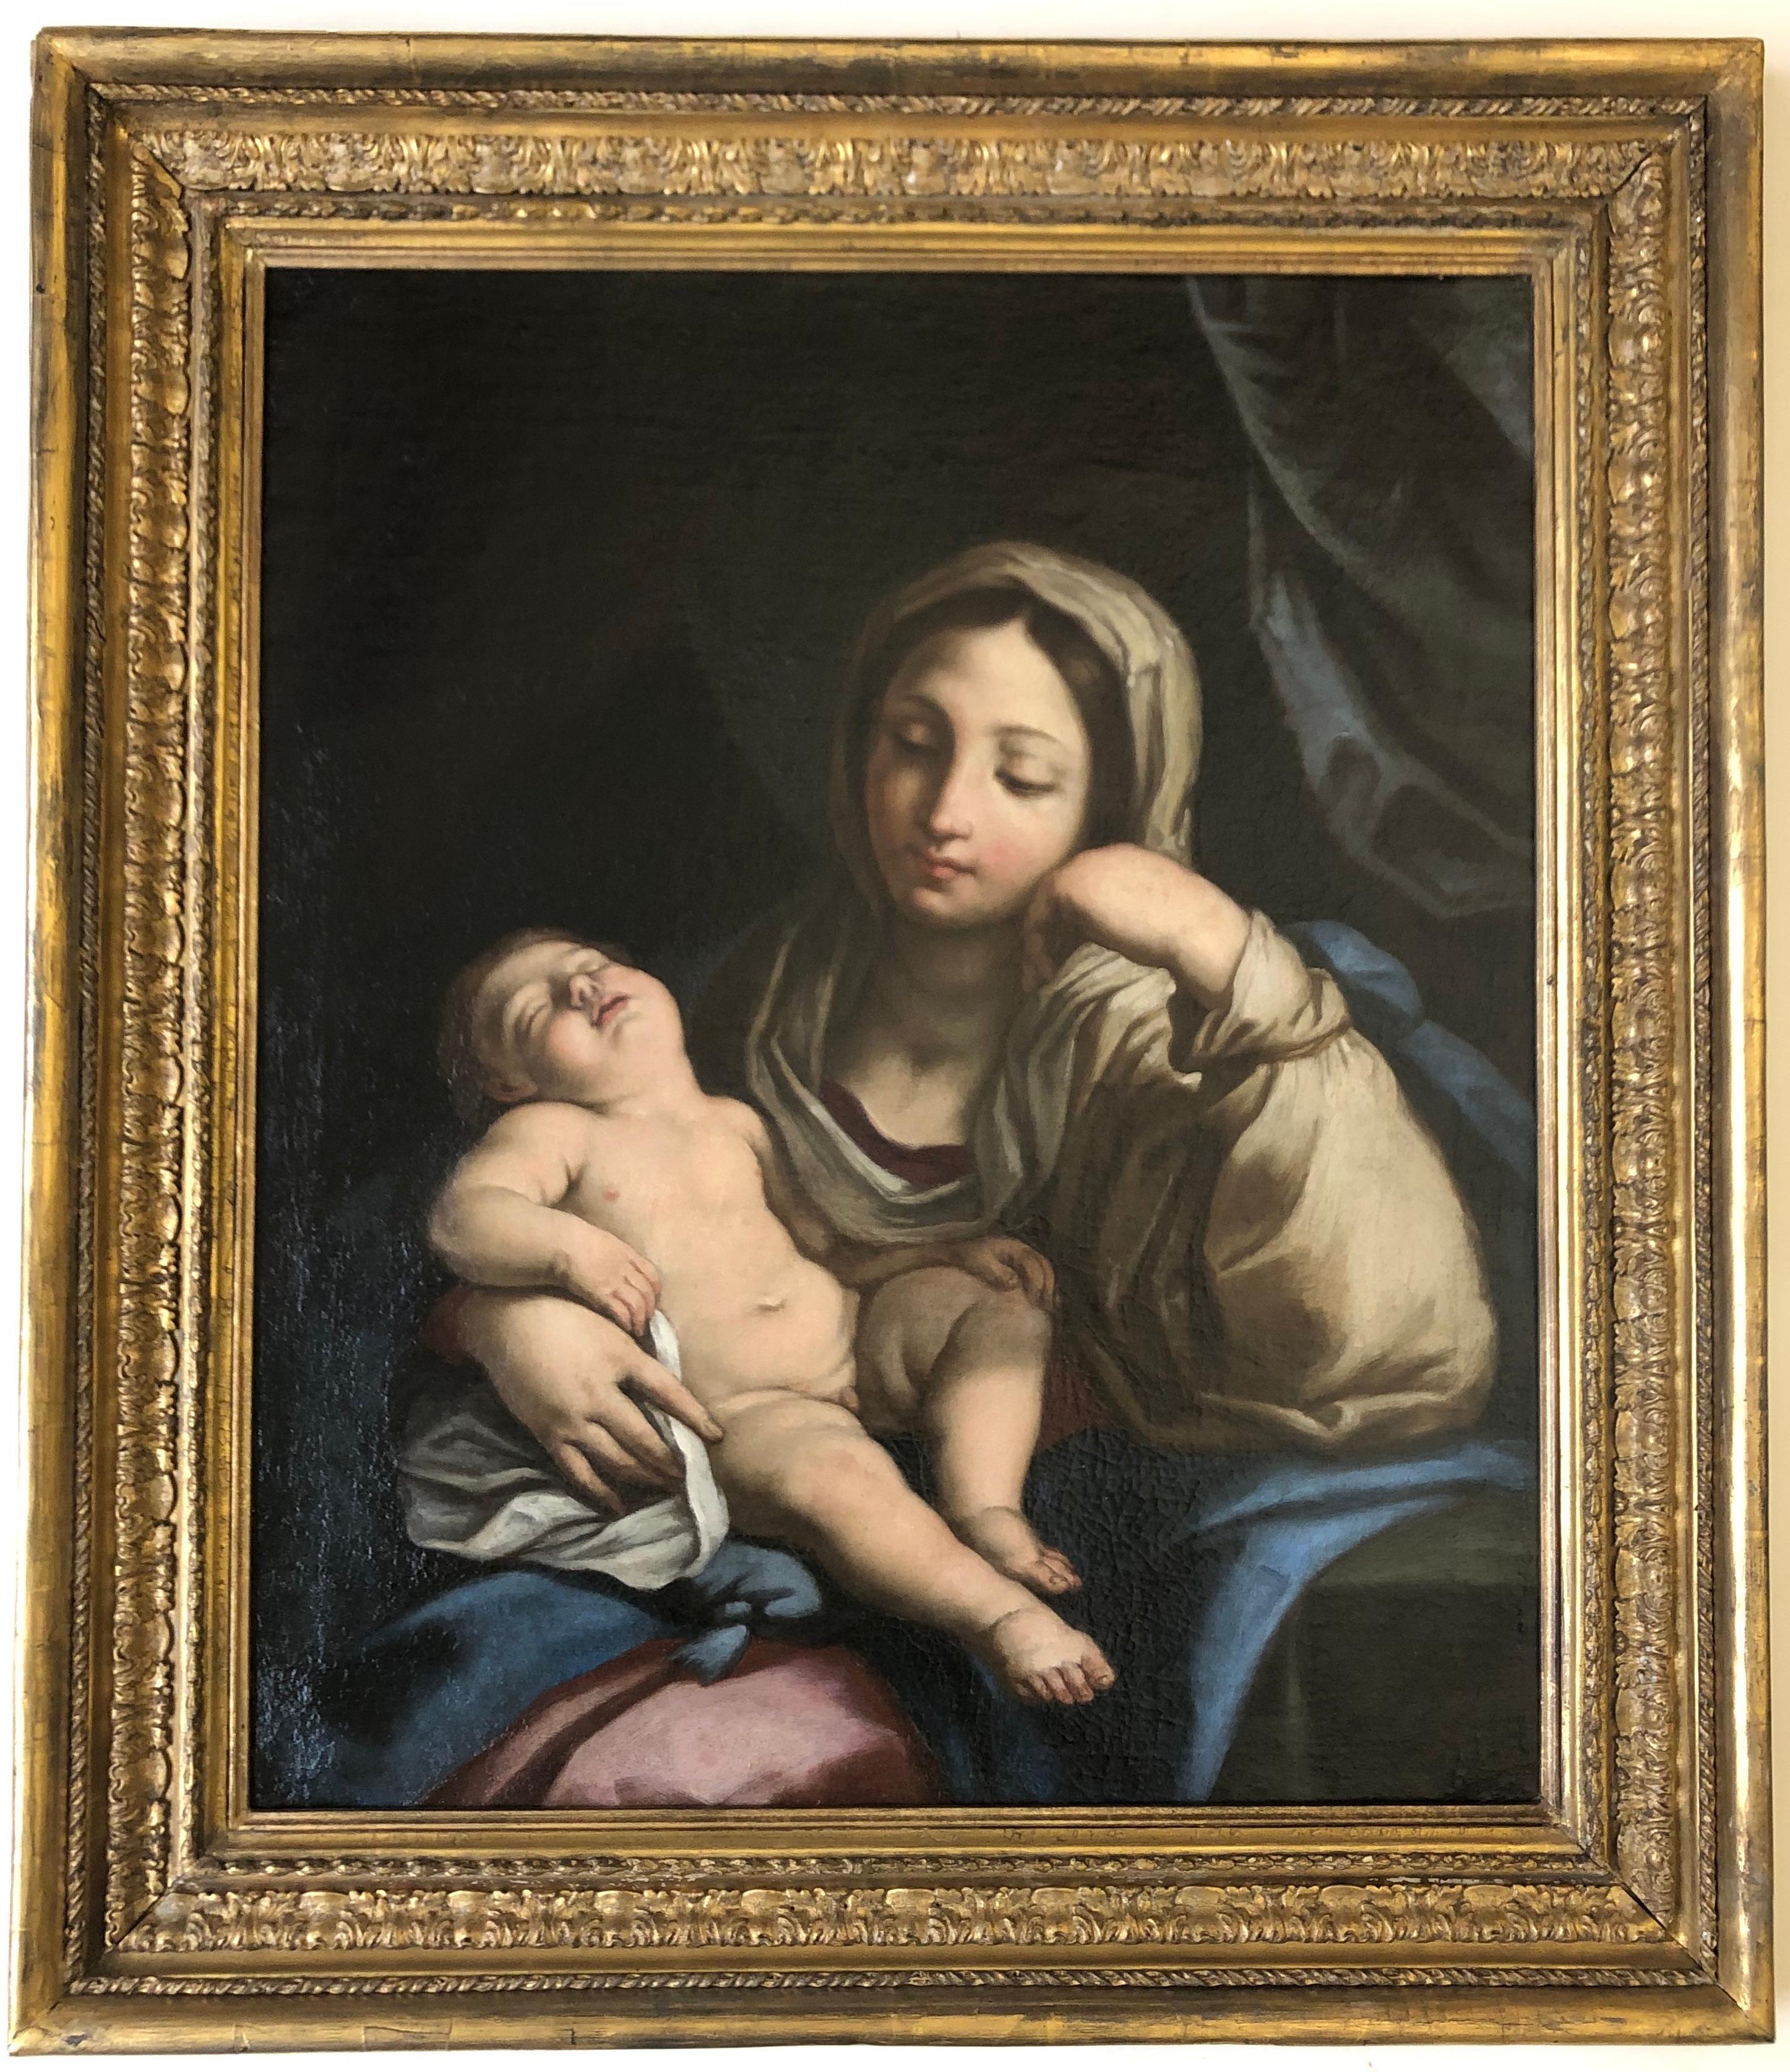 Circle of Maratta, Maria and Child, Madonna, Christ, Antique Frame, Old Master - Painting by Workshop Of Carlo Maratta